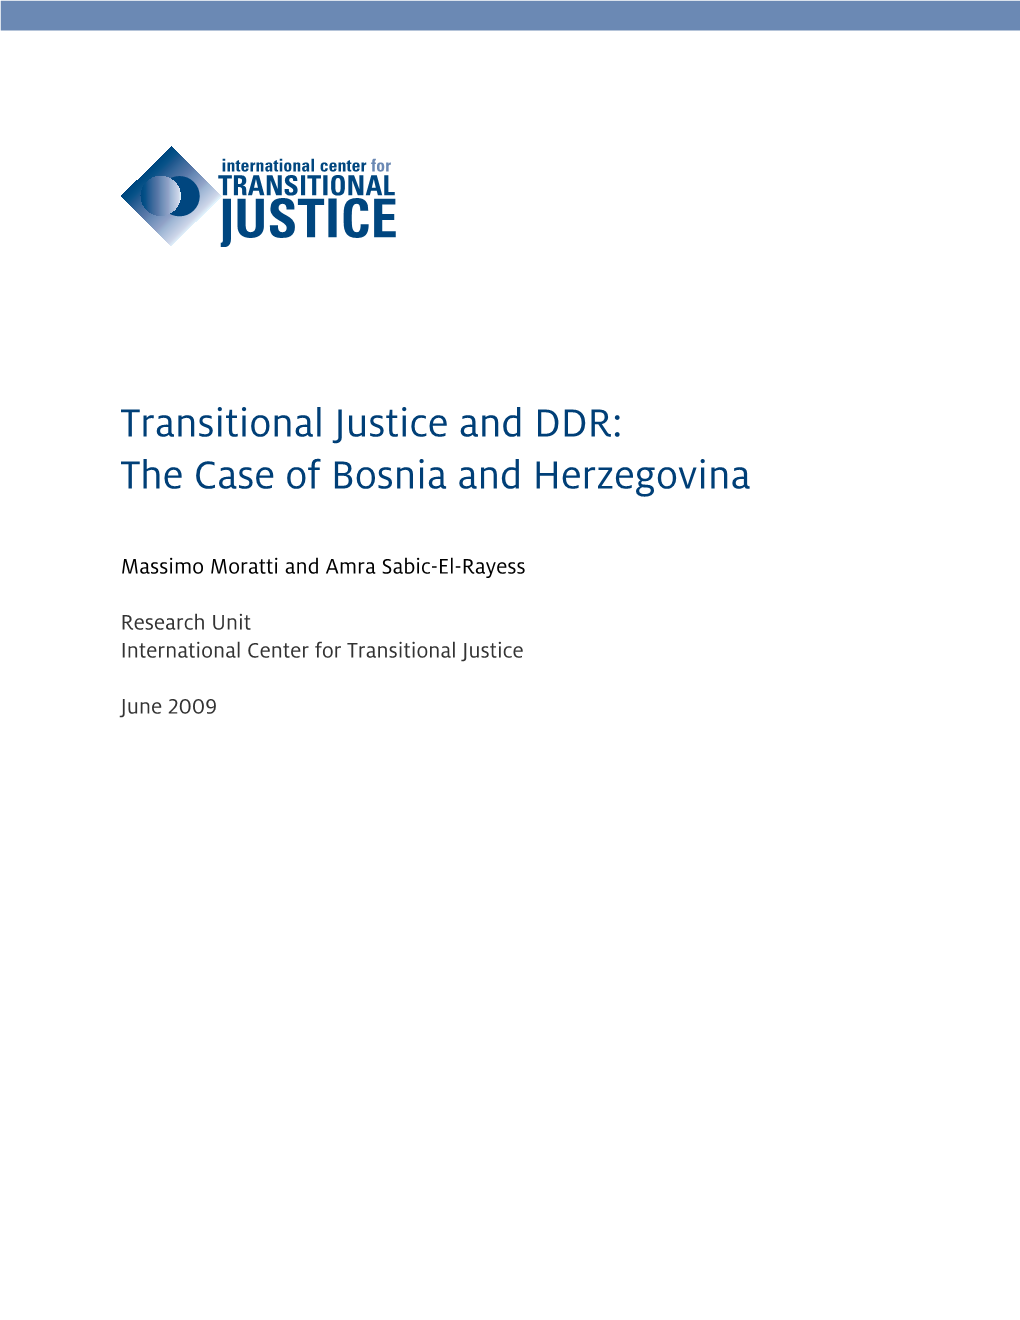 Transitional Justice and DDR: the Case of Bosnia and Herzegovina